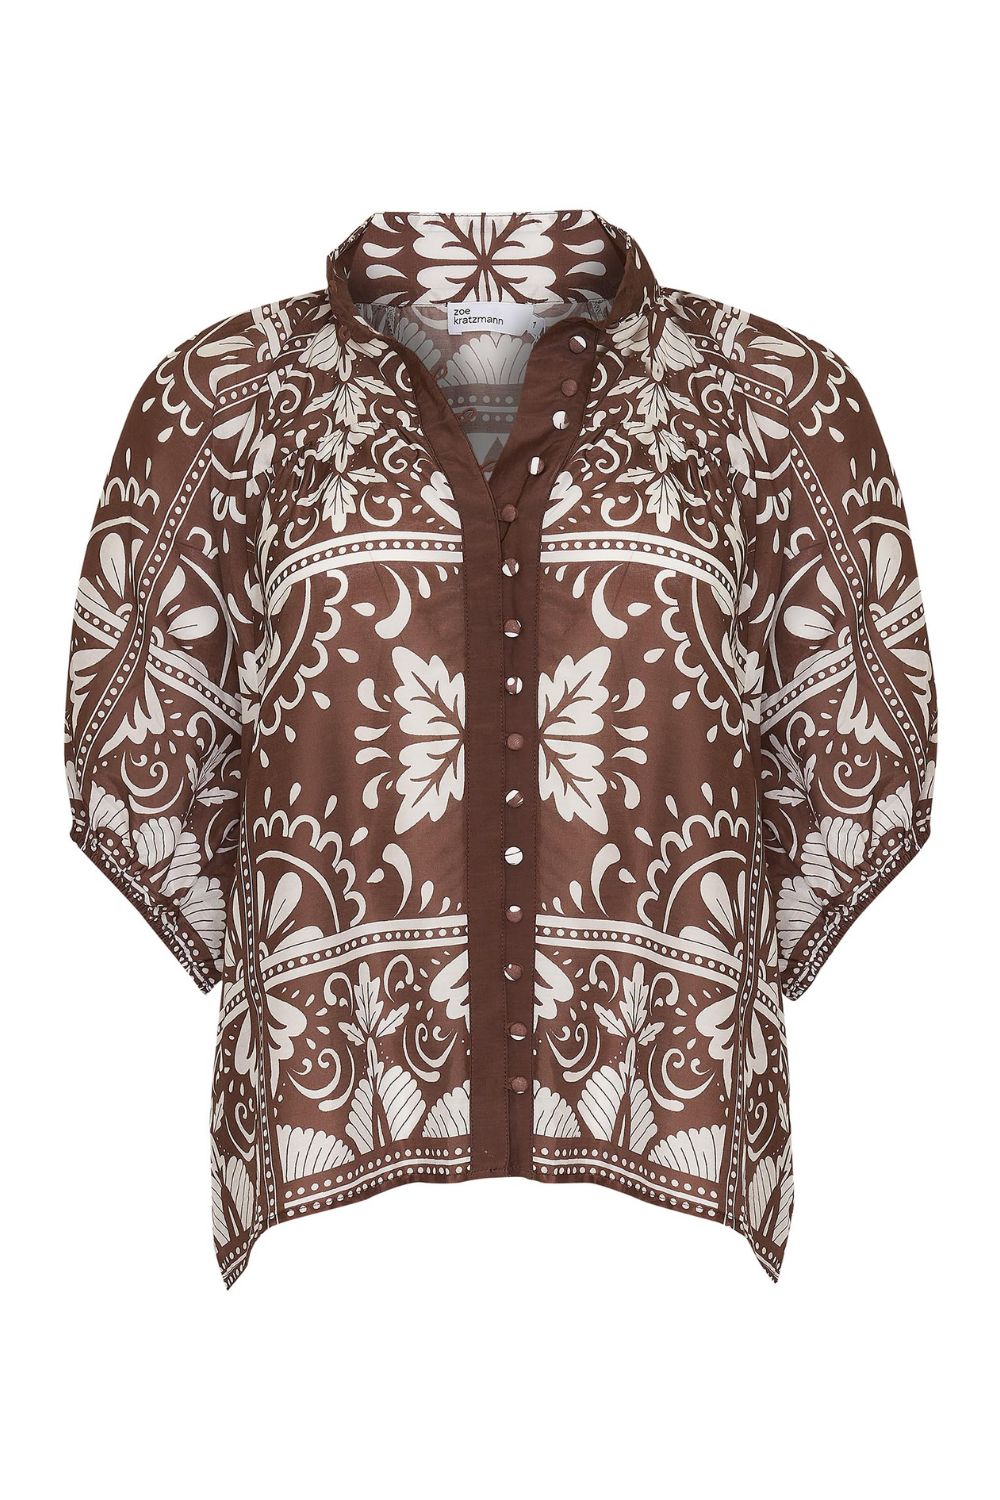 brown and white print, top, high neck, button down, mid length sleeve, product image